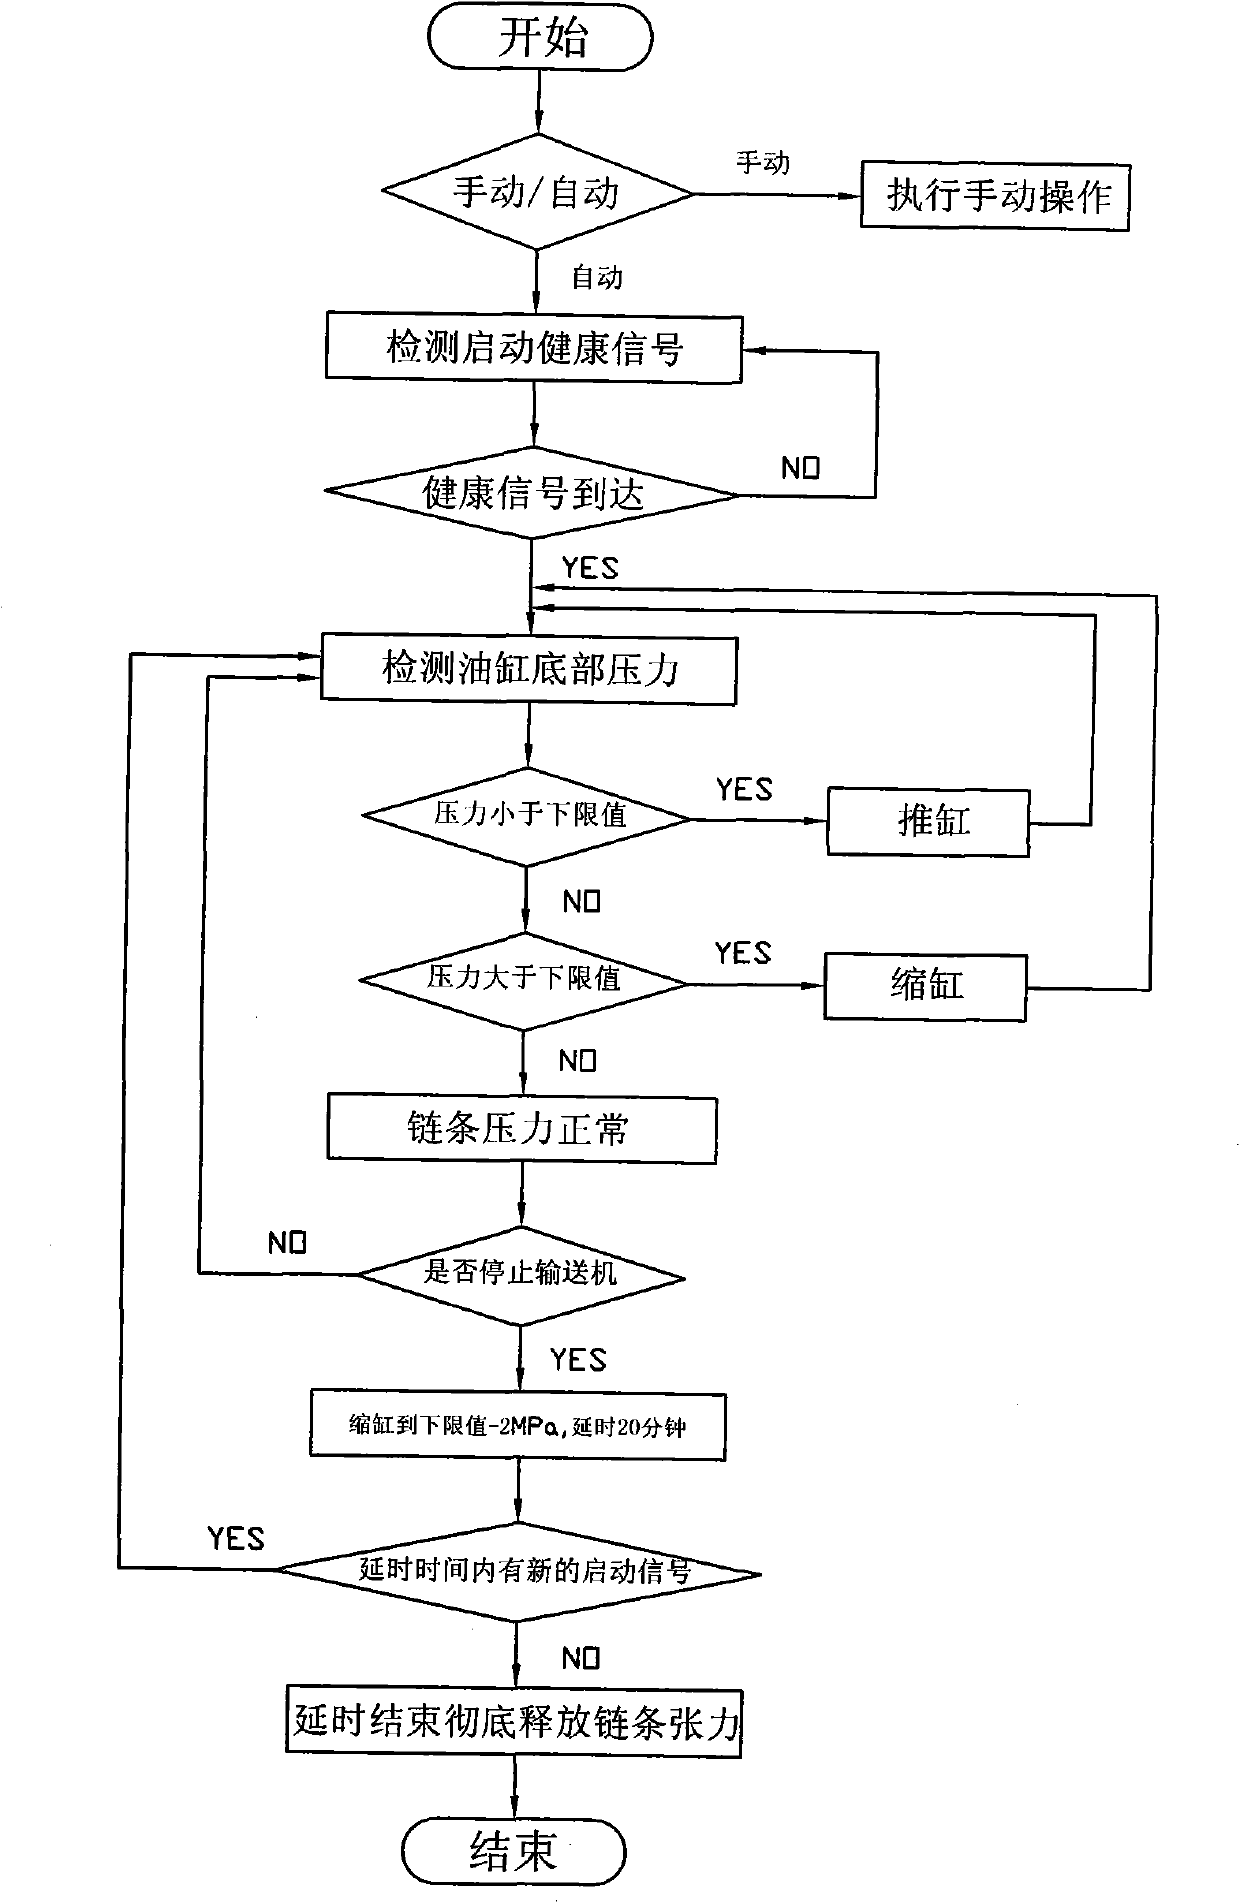 Control device for automatic tension degree of chain